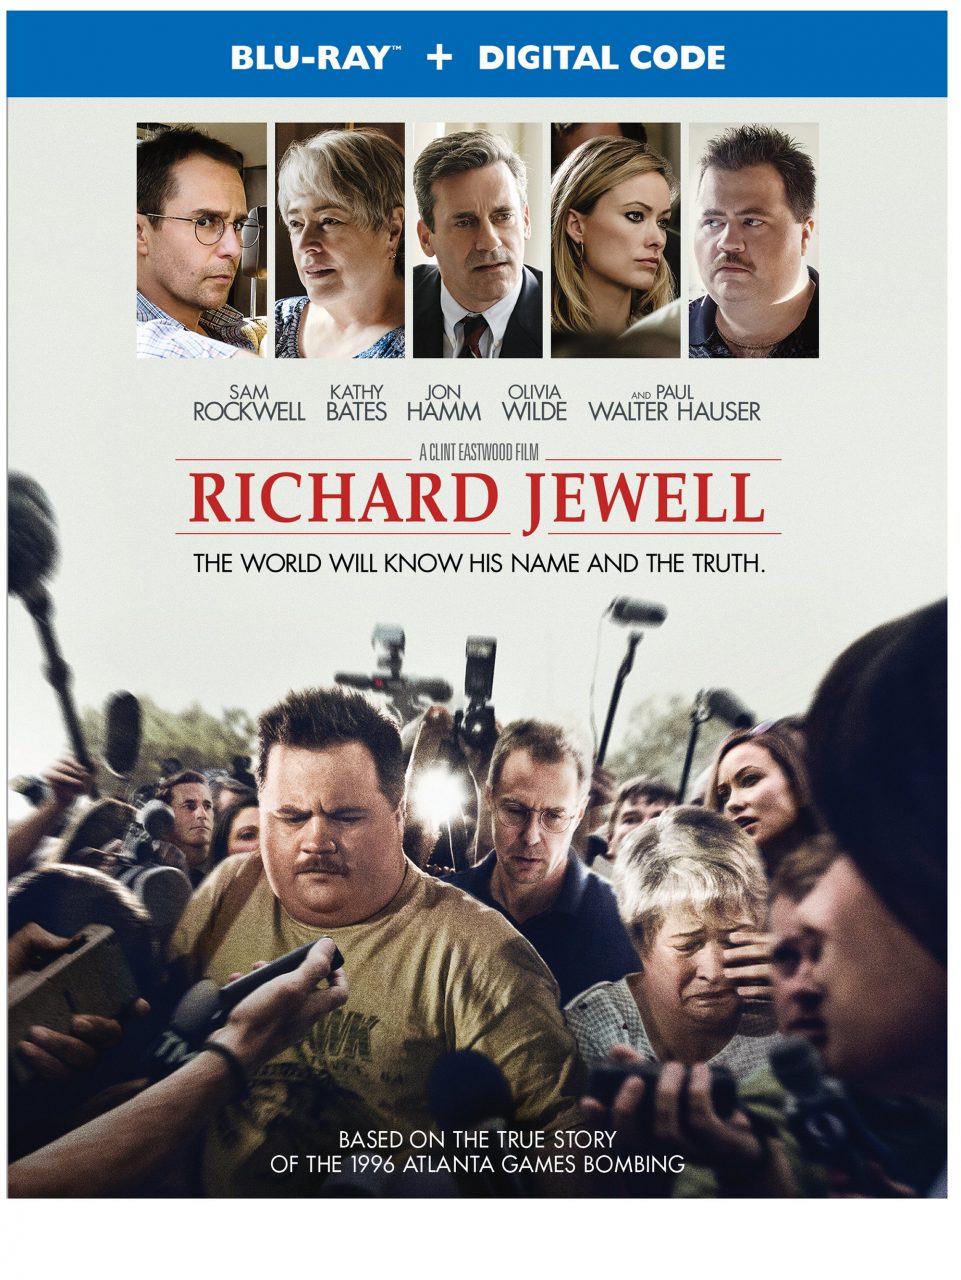 Richard Jewell Blu-Ray Combo Pack cover (Warner Bros. Home Entertainment)